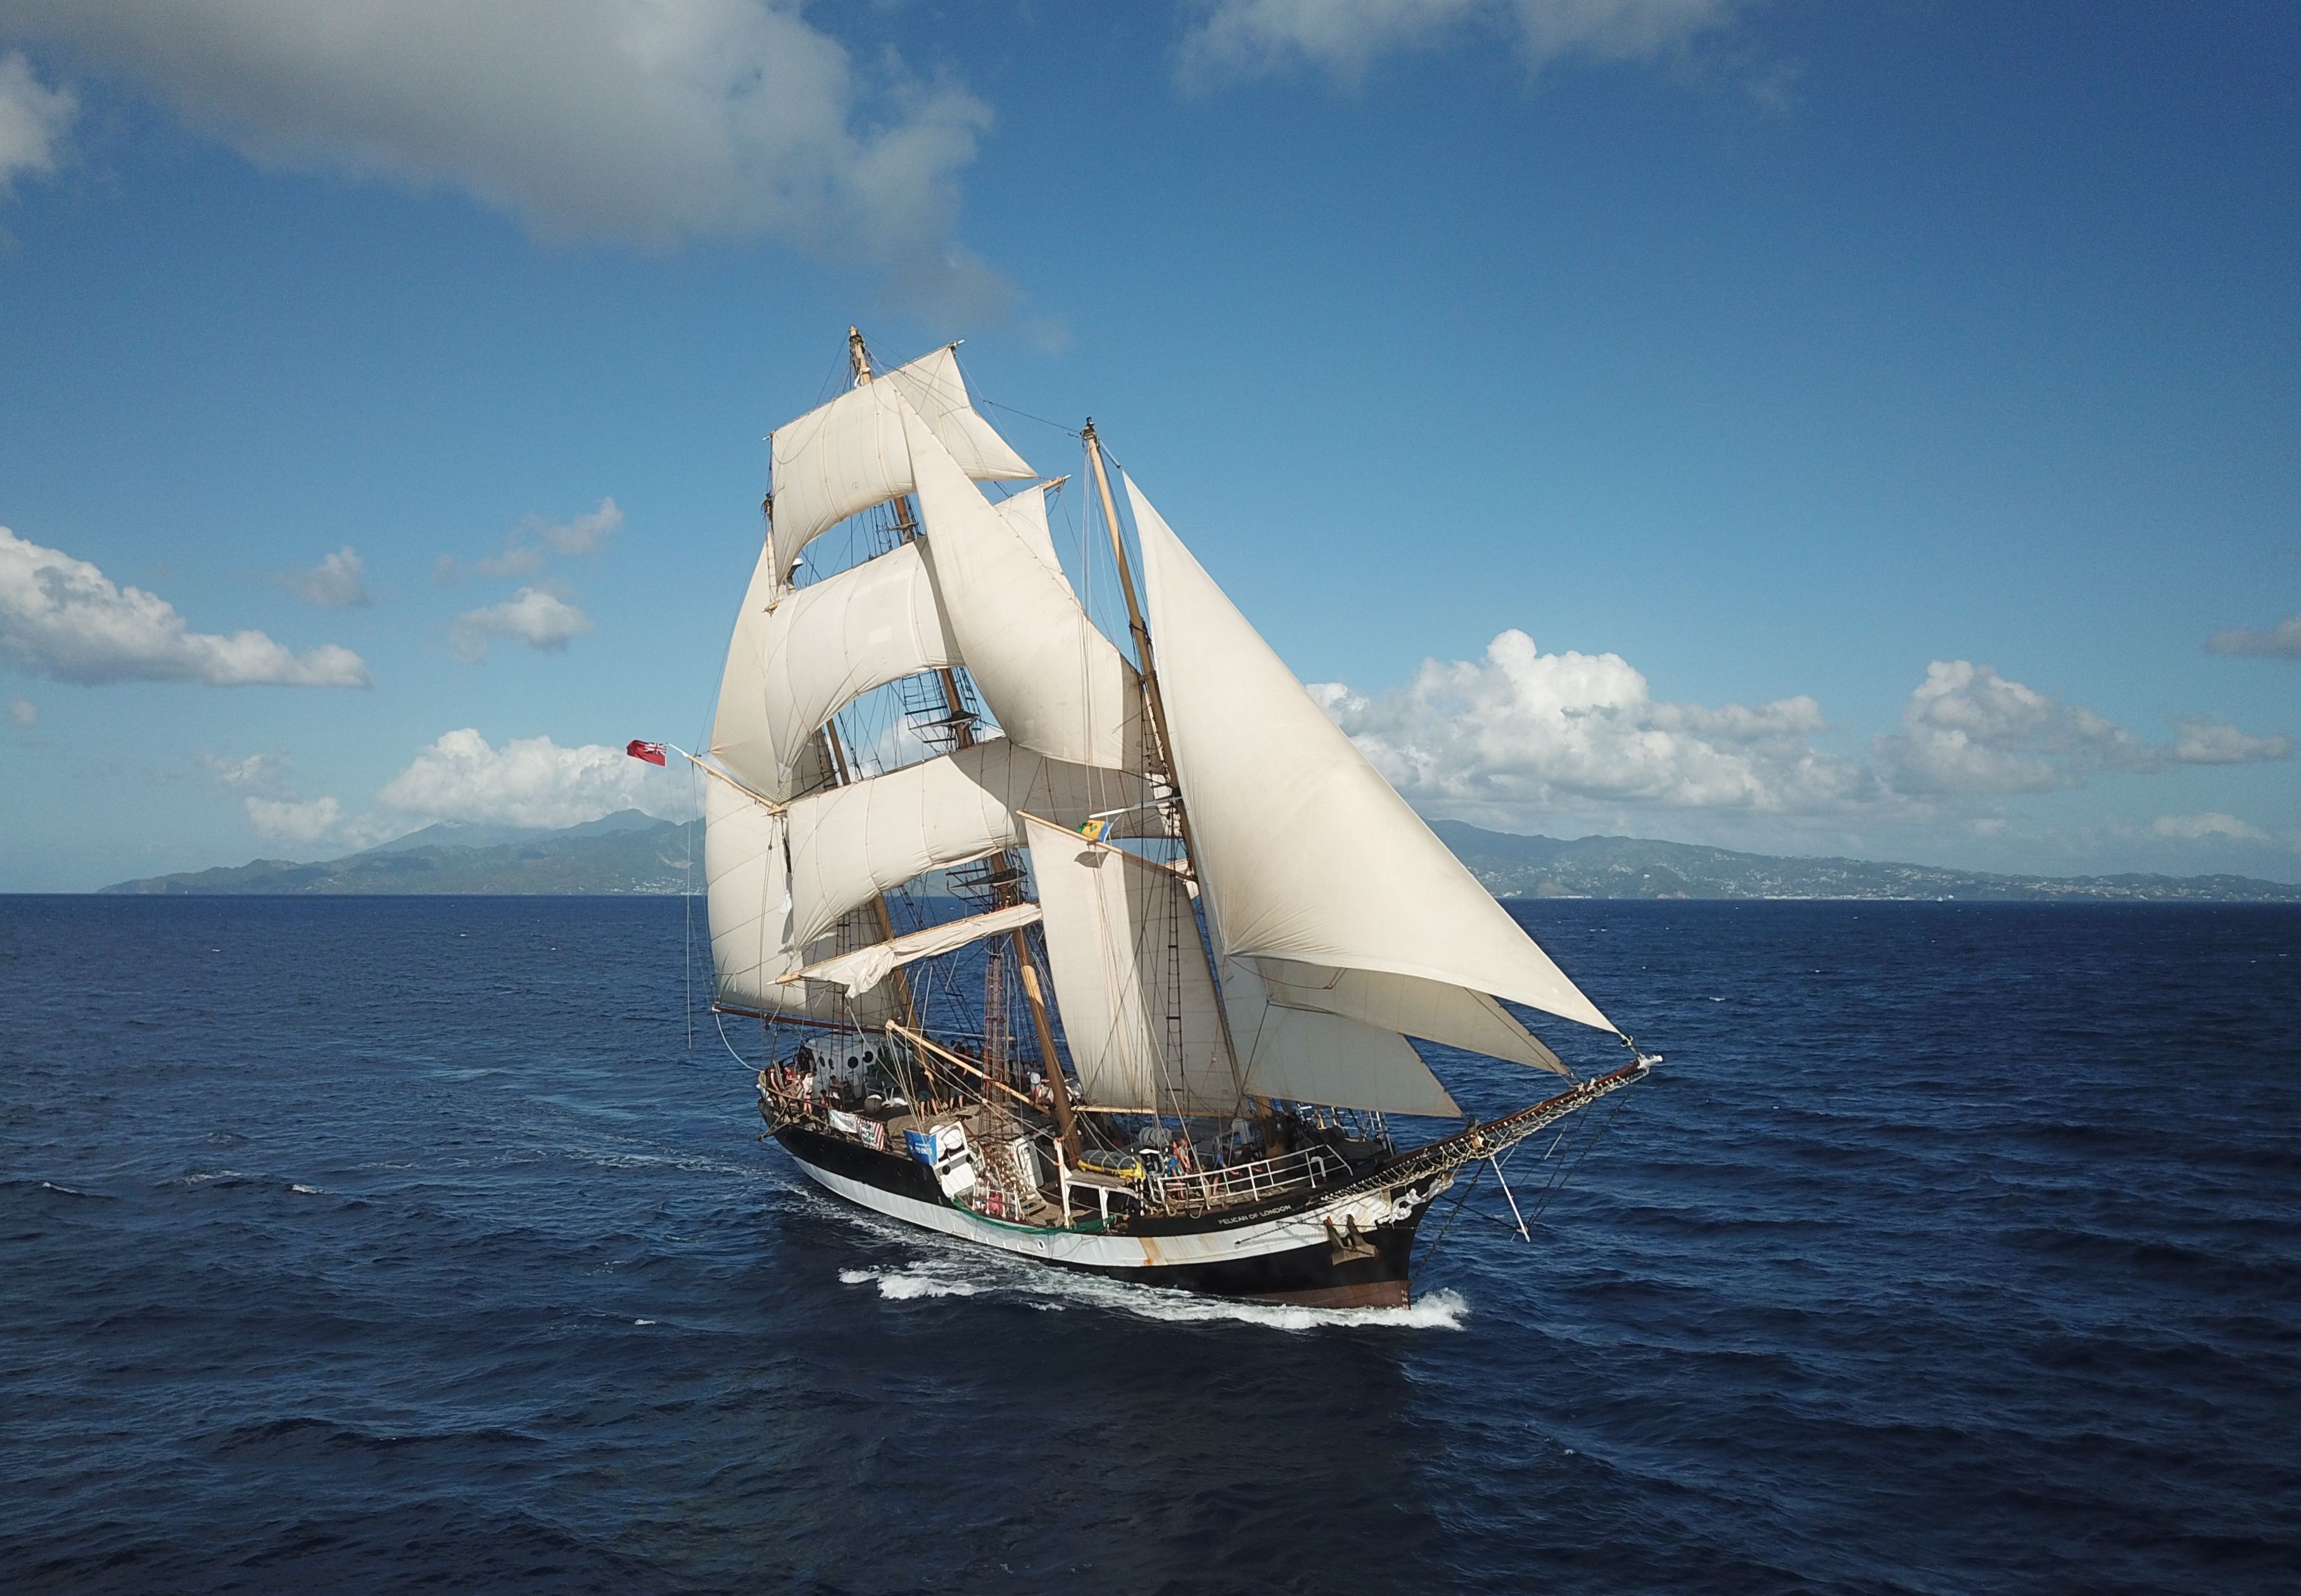 The tall ship Pelican of London under sail